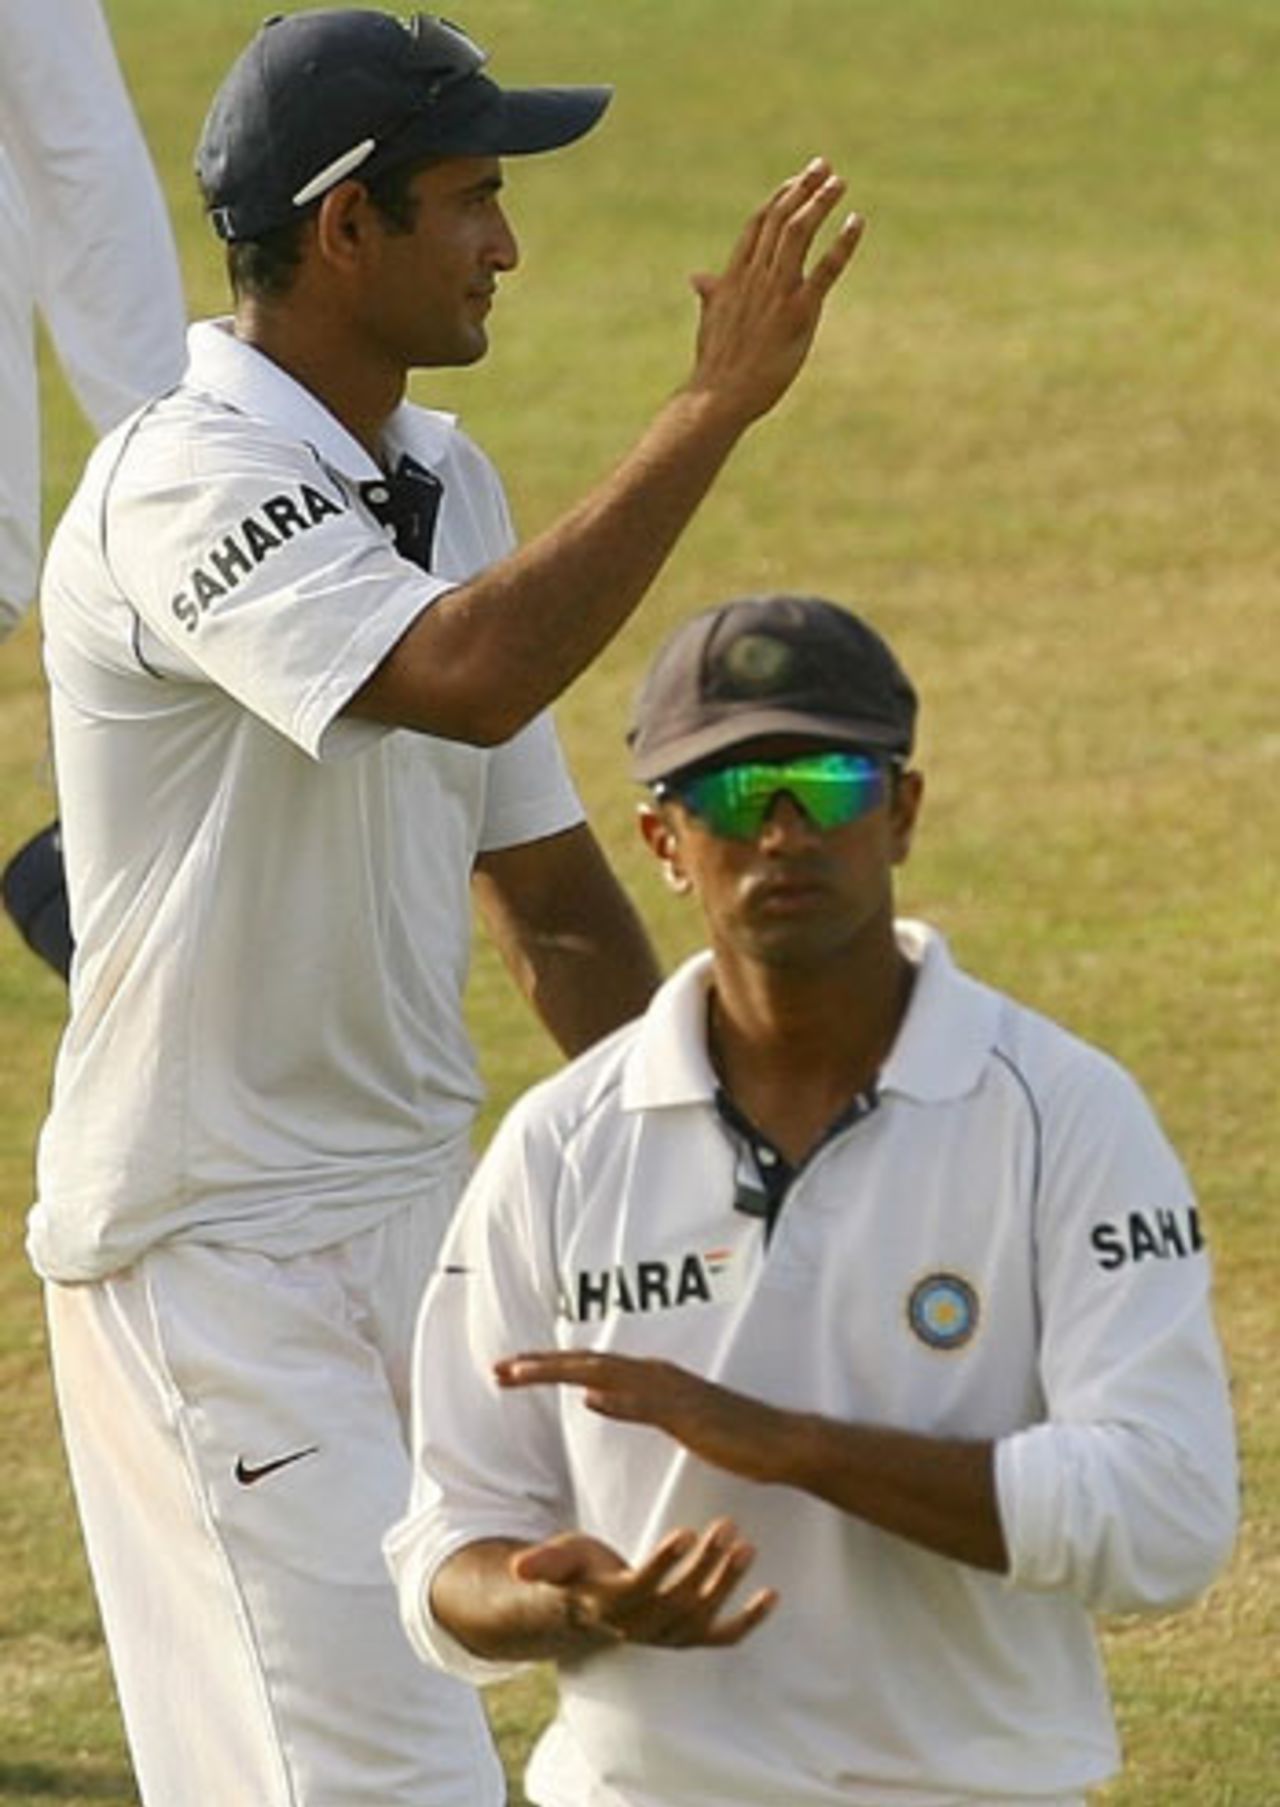 Rahul Dravid applauds India's effort in the field after West Indies escape with a draw, West Indies v India, 2nd Test, St Lucia, 5th day, June 14, 2006